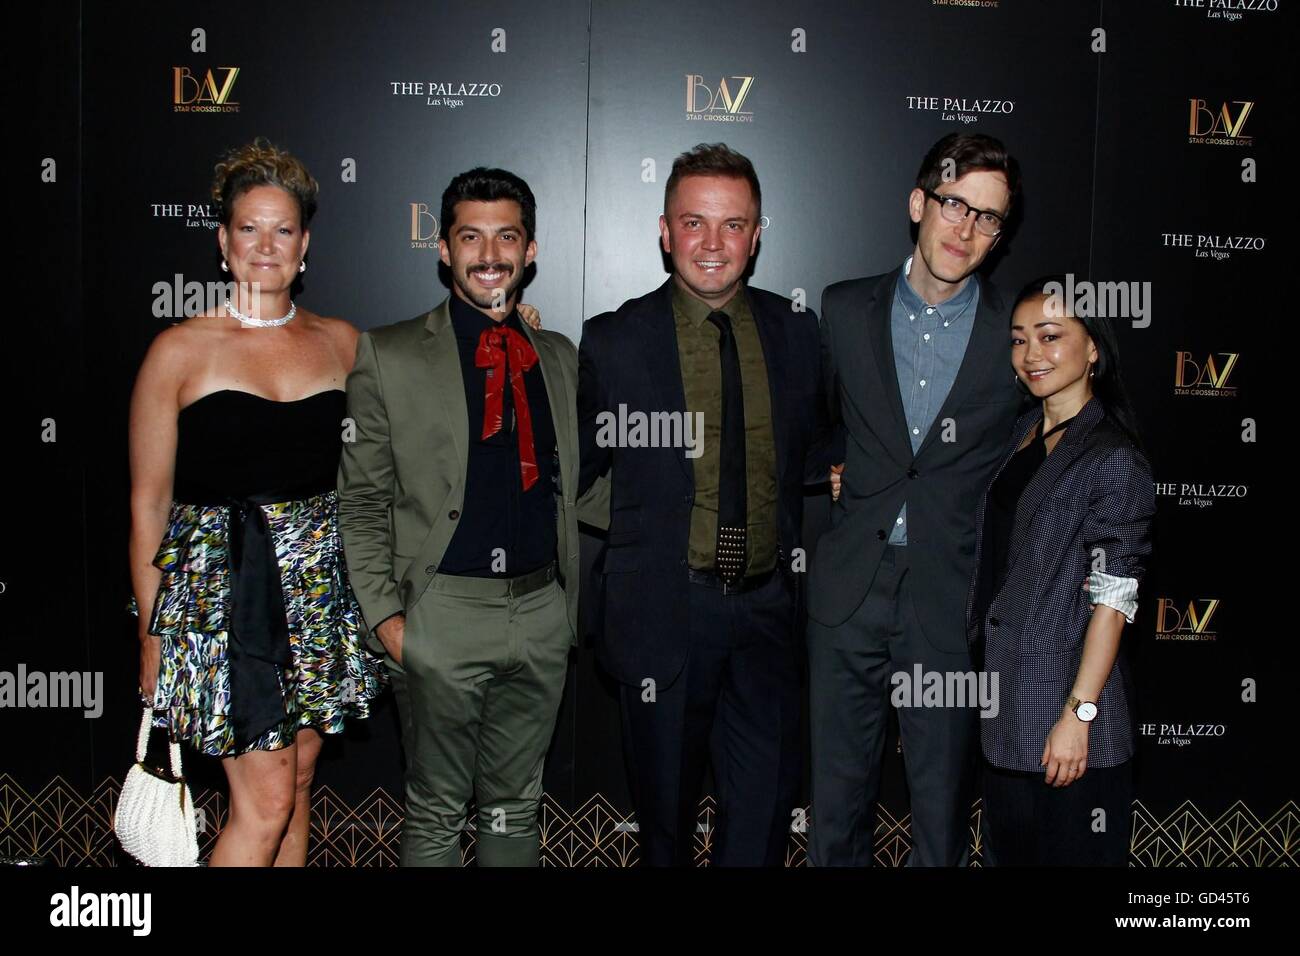 Las Vegas, NV, USA. 12th July, 2016. Siobhan O'Neil (Producer), Steve Mazurek (Costume designer), Shane Scheel (co-creator/producer), Anderson Davis (co-creator/producer) and Sumie Maeda (Associate director) at arrivals for BAZ - Star Crossed Love Opening Celebration, The Palazzo Theatre, Las Vegas, NV July 12, 2016. Credit:  James Atoa/Everett Collection/Alamy Live News Stock Photo